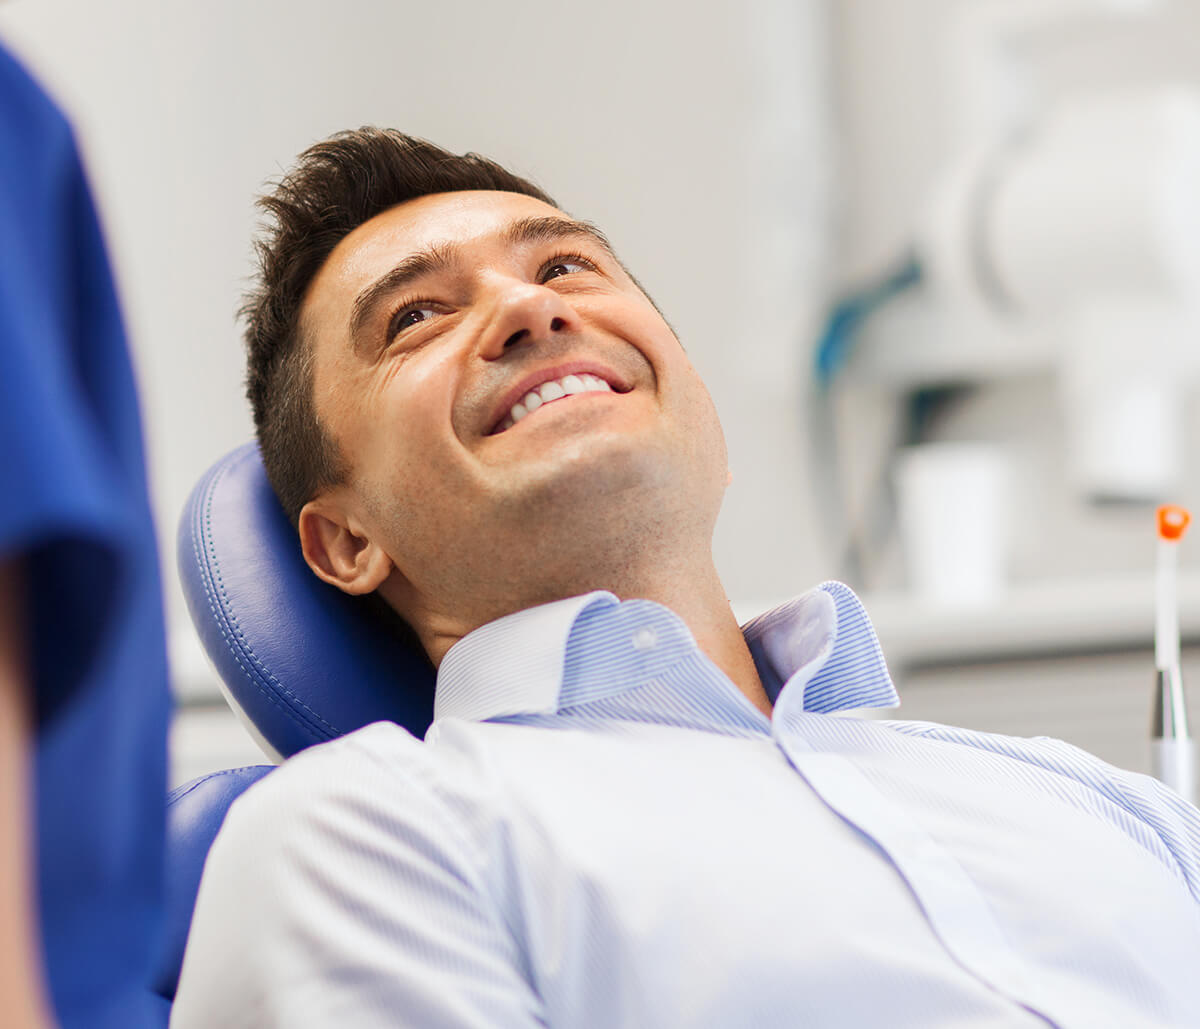 Where to Find Affordable, High Quality Dental Implants in San Mateo, California Area